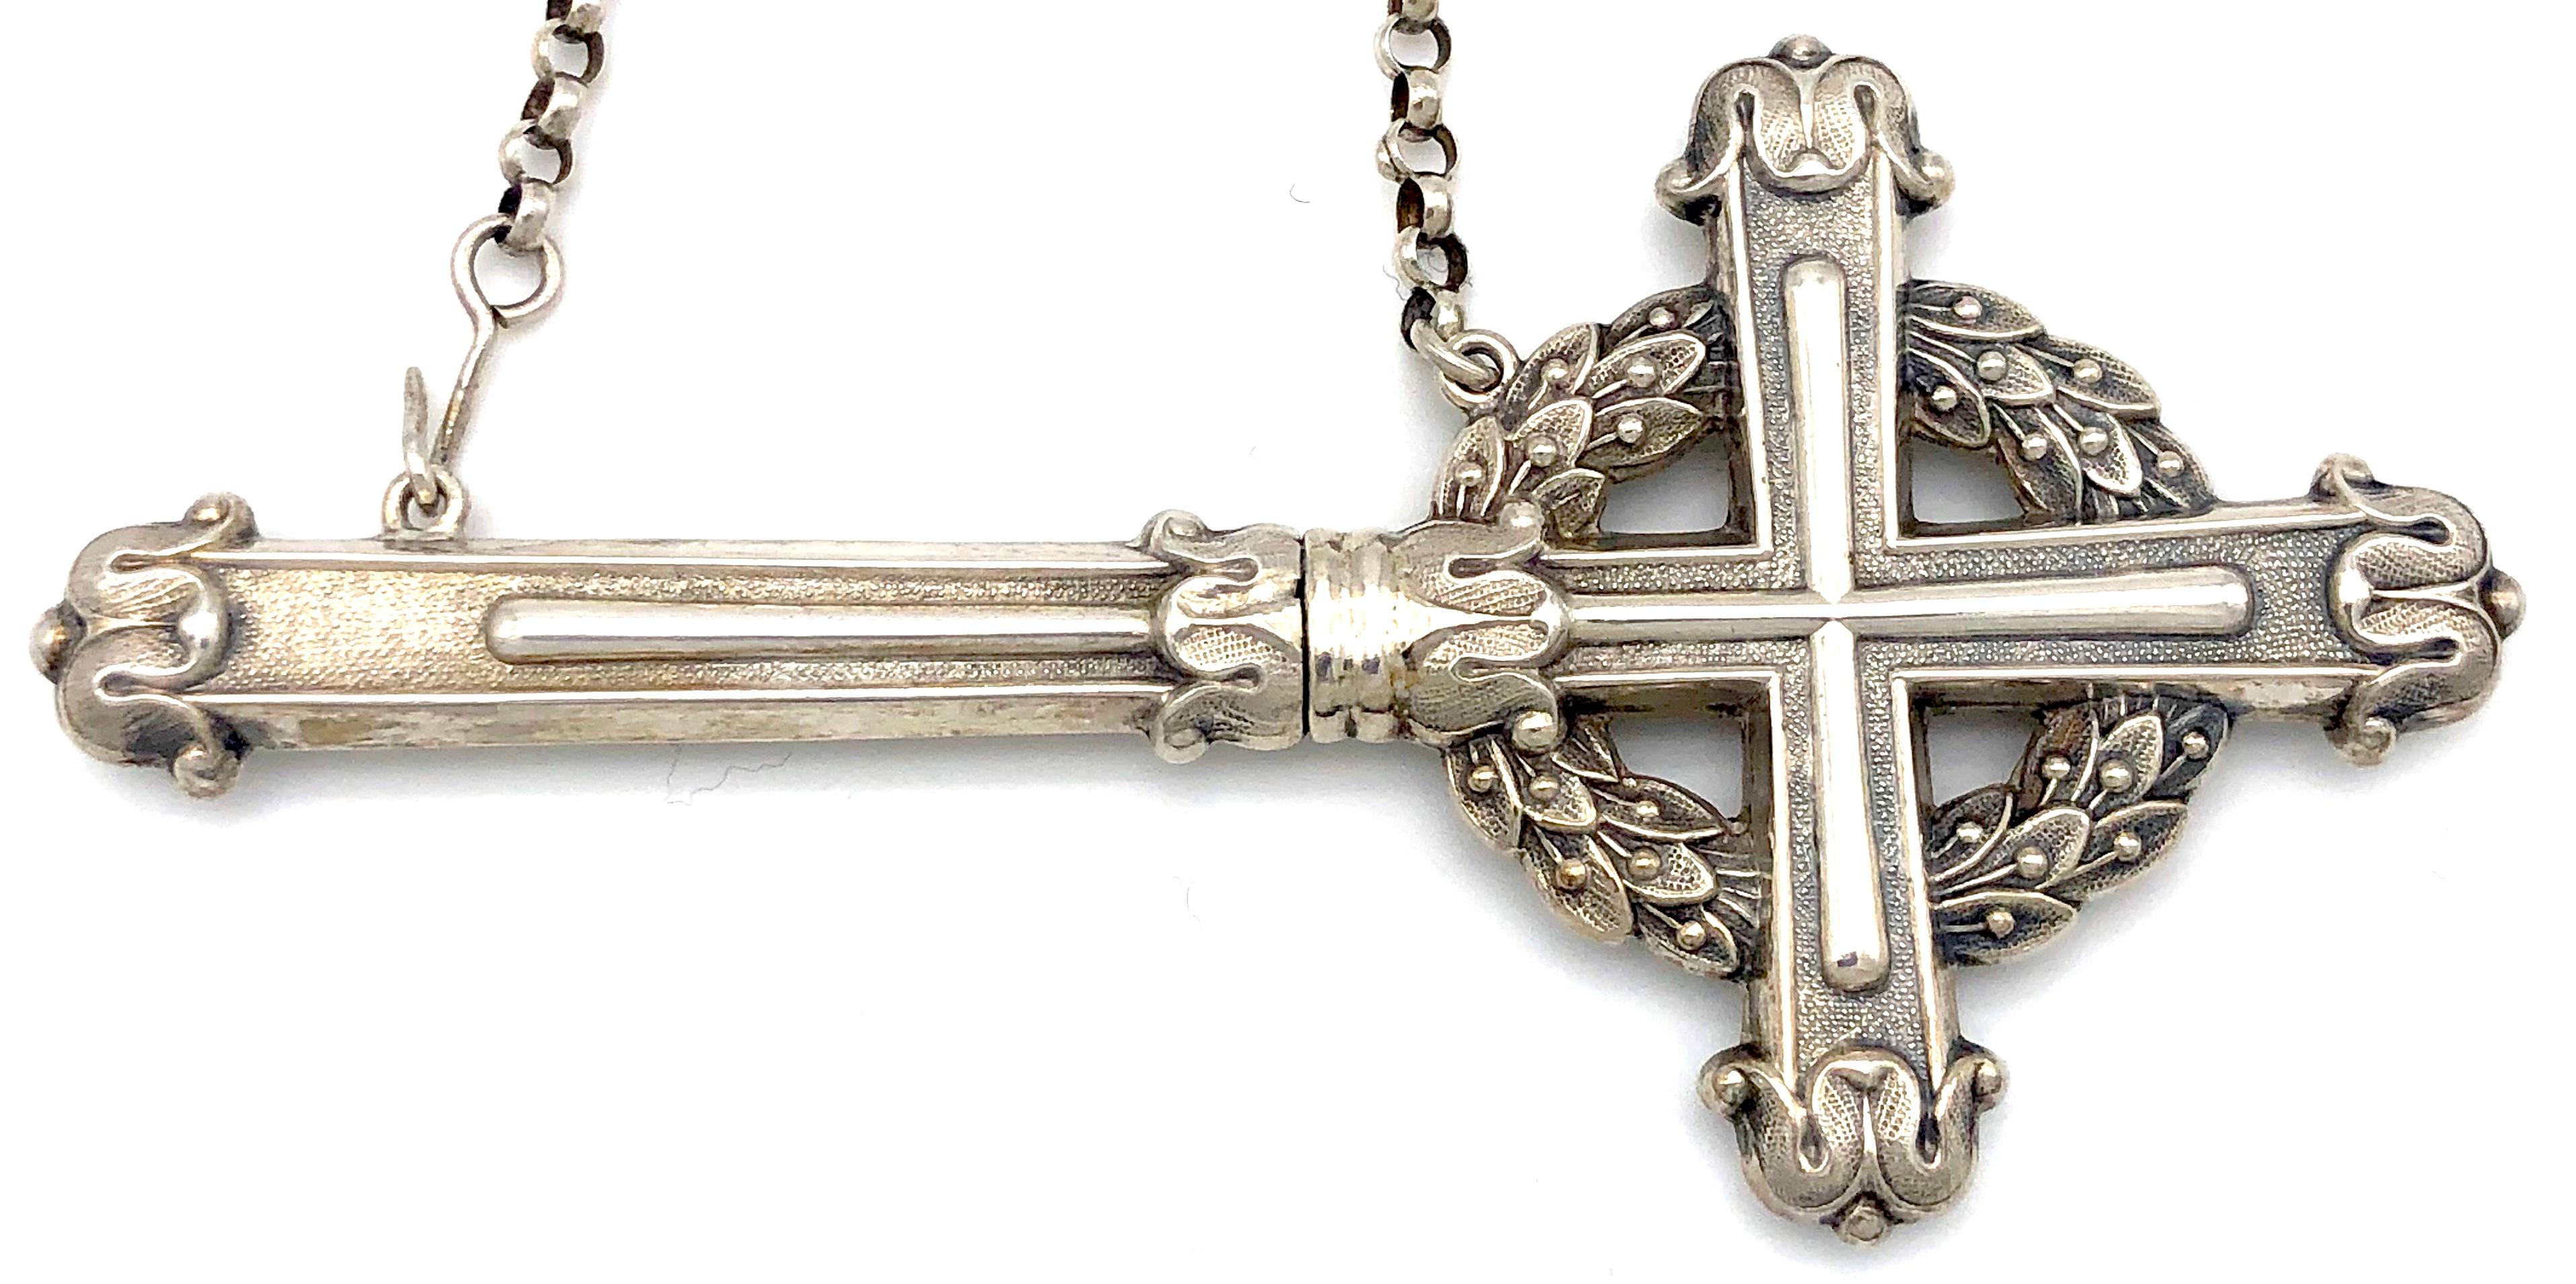 Very rare silver chatelaine with a needle case in the shape of a cross. The hook of the chatelaine is decorated with a  flower bouquet  ia vase.